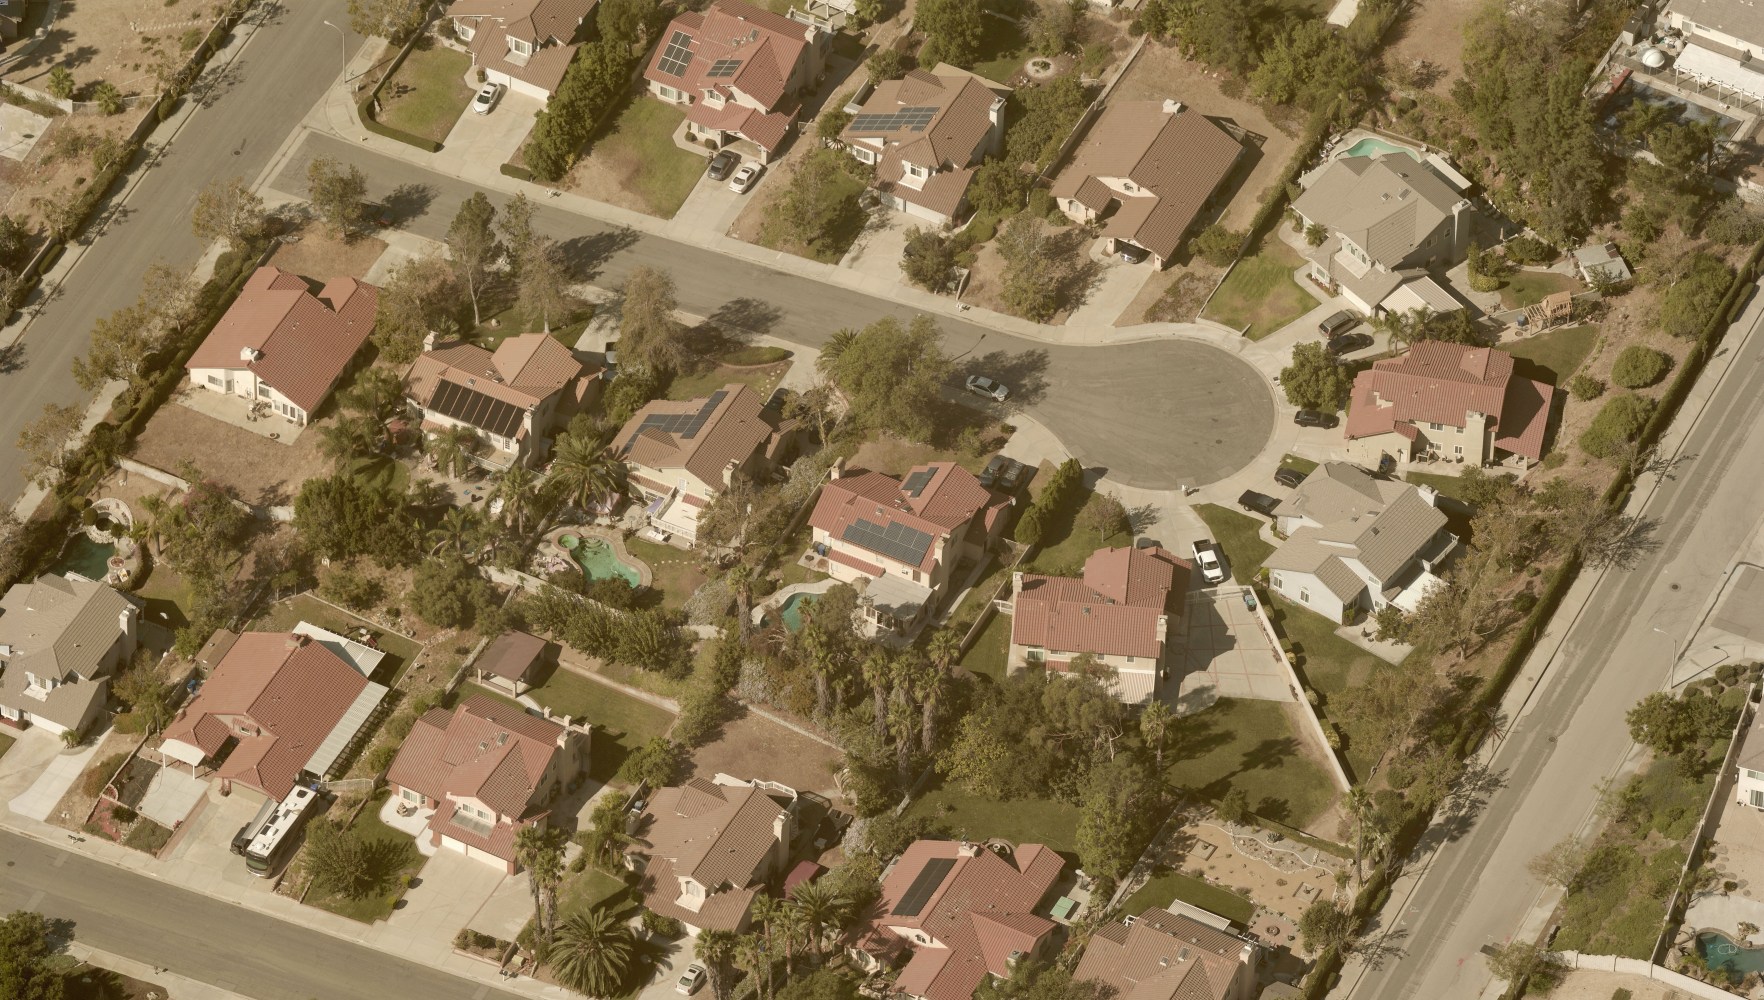 Residential PV projects through aerial imagery